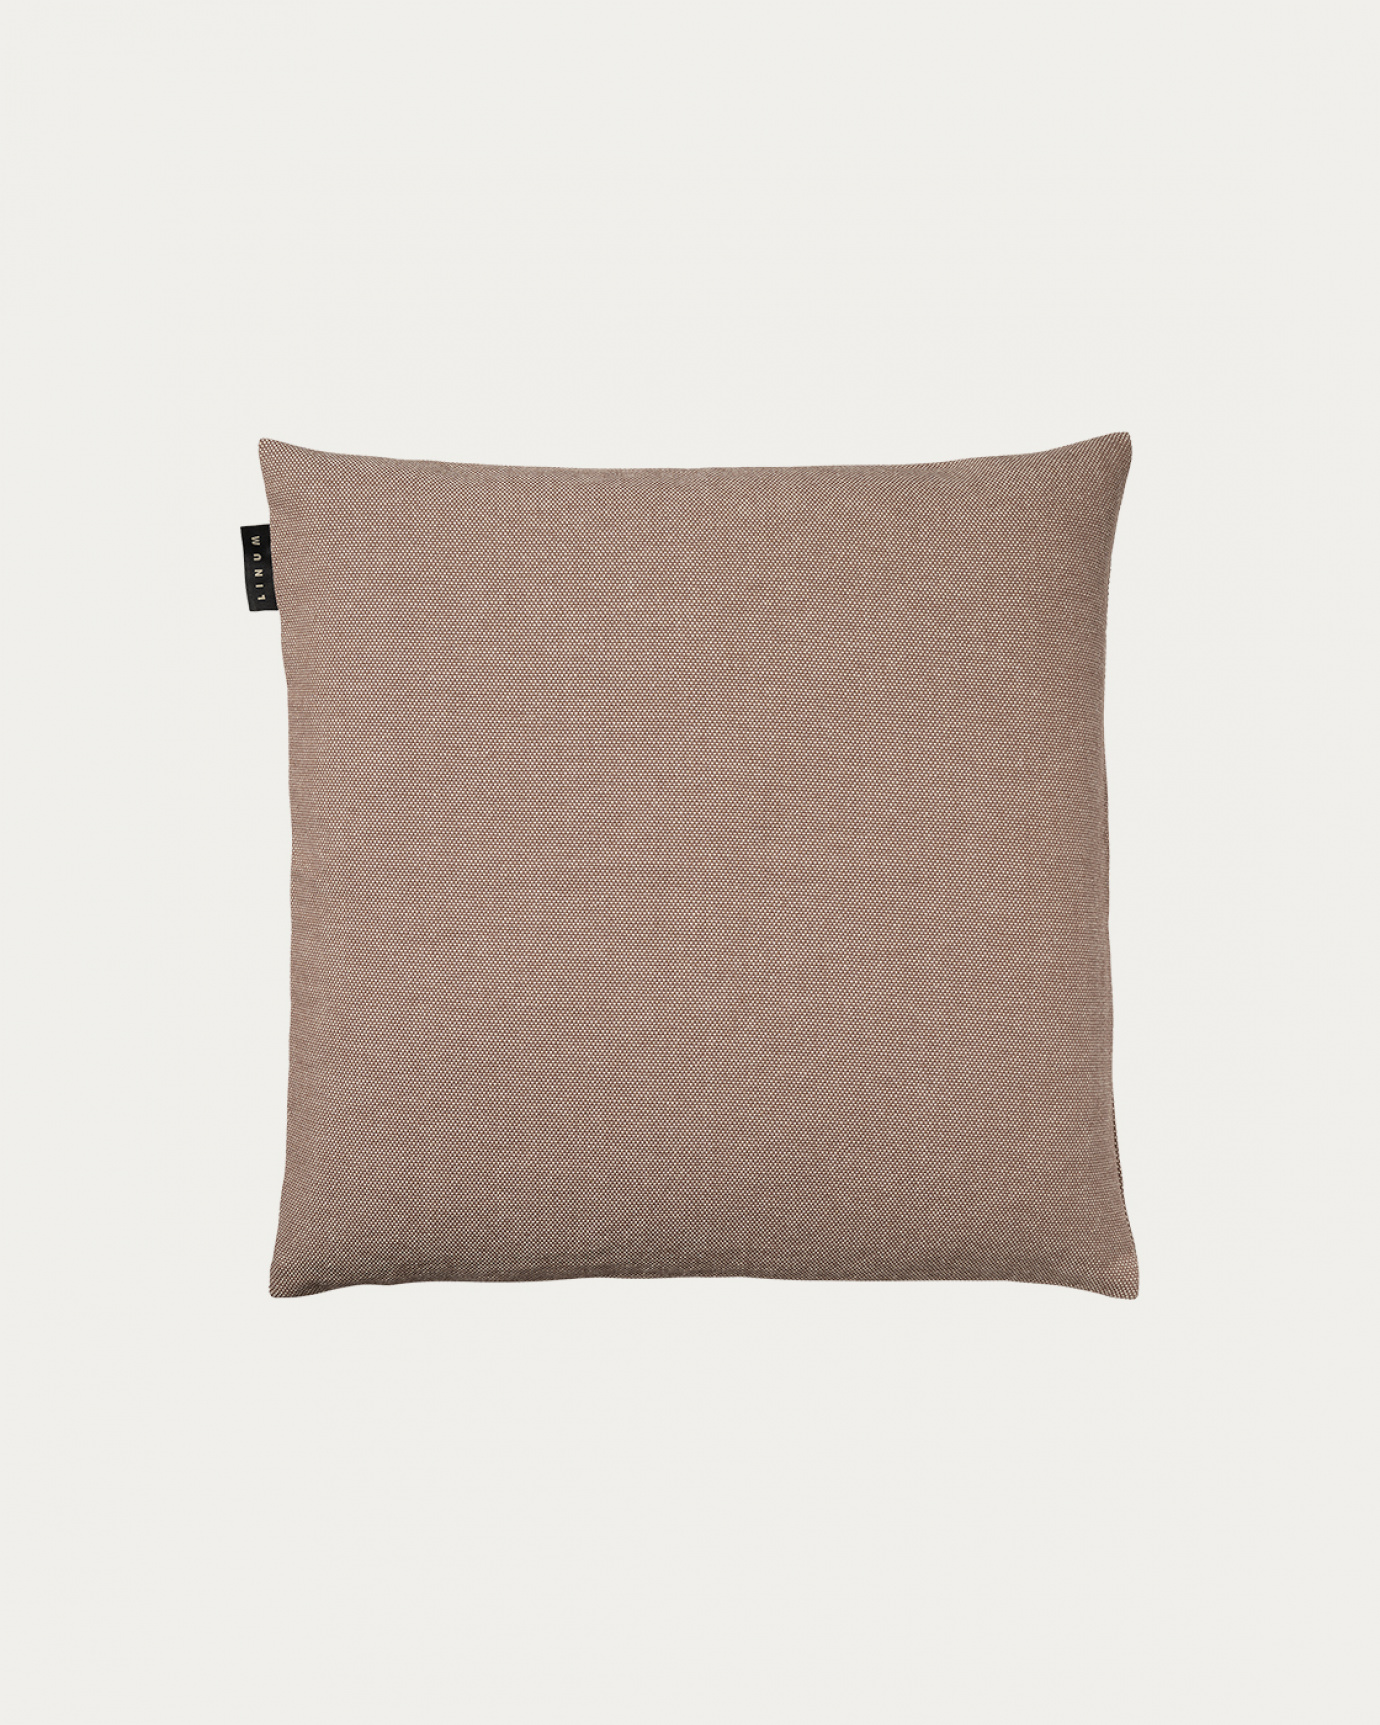 PEPPER Cushion cover 40x40 cm Dark mole brown in the group ASSORTMENT / STANDARD / Cushion covers at LINUM DESIGN (23PEP04000B45)